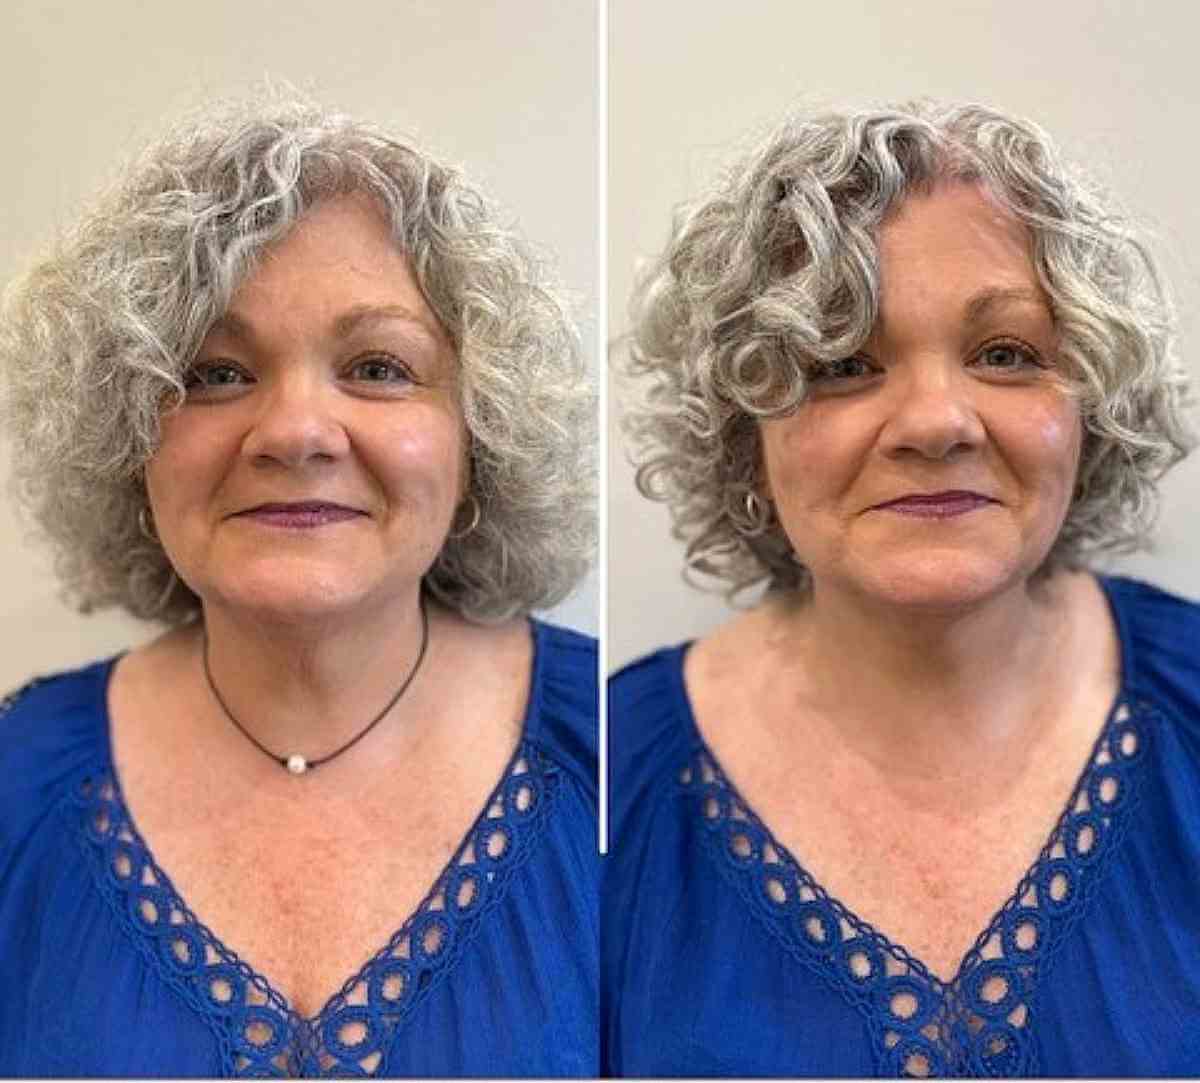 Chin-Length Hairstyle with Curls for Older Women Over 60